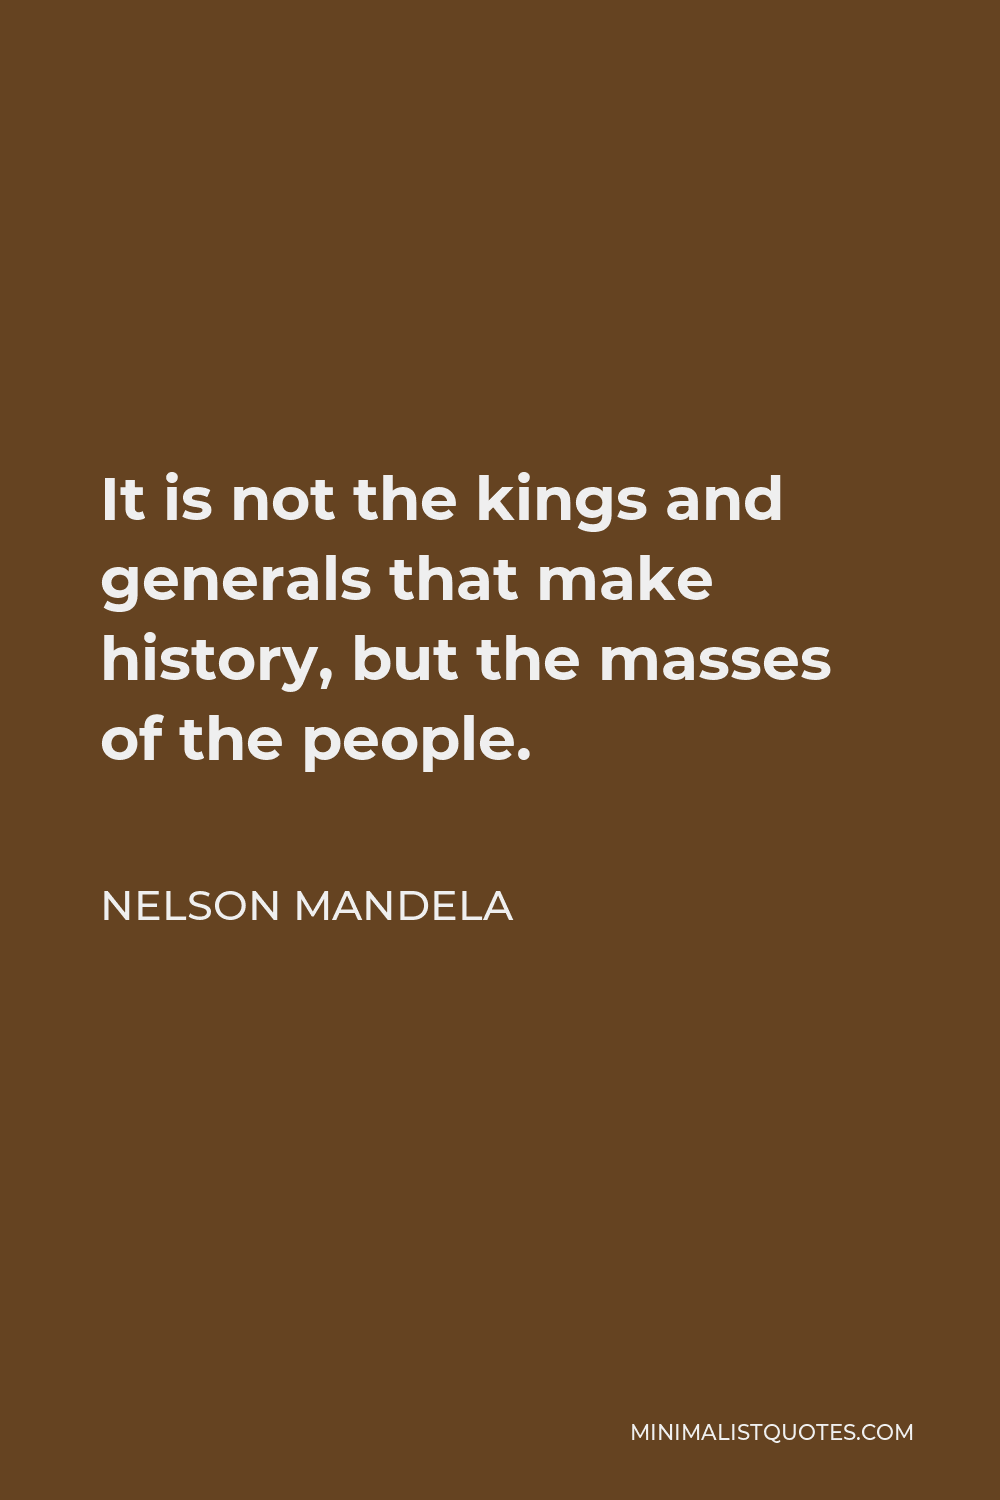 Nelson Mandela Quote - It is not the kings and generals that make history, but the masses of the people.